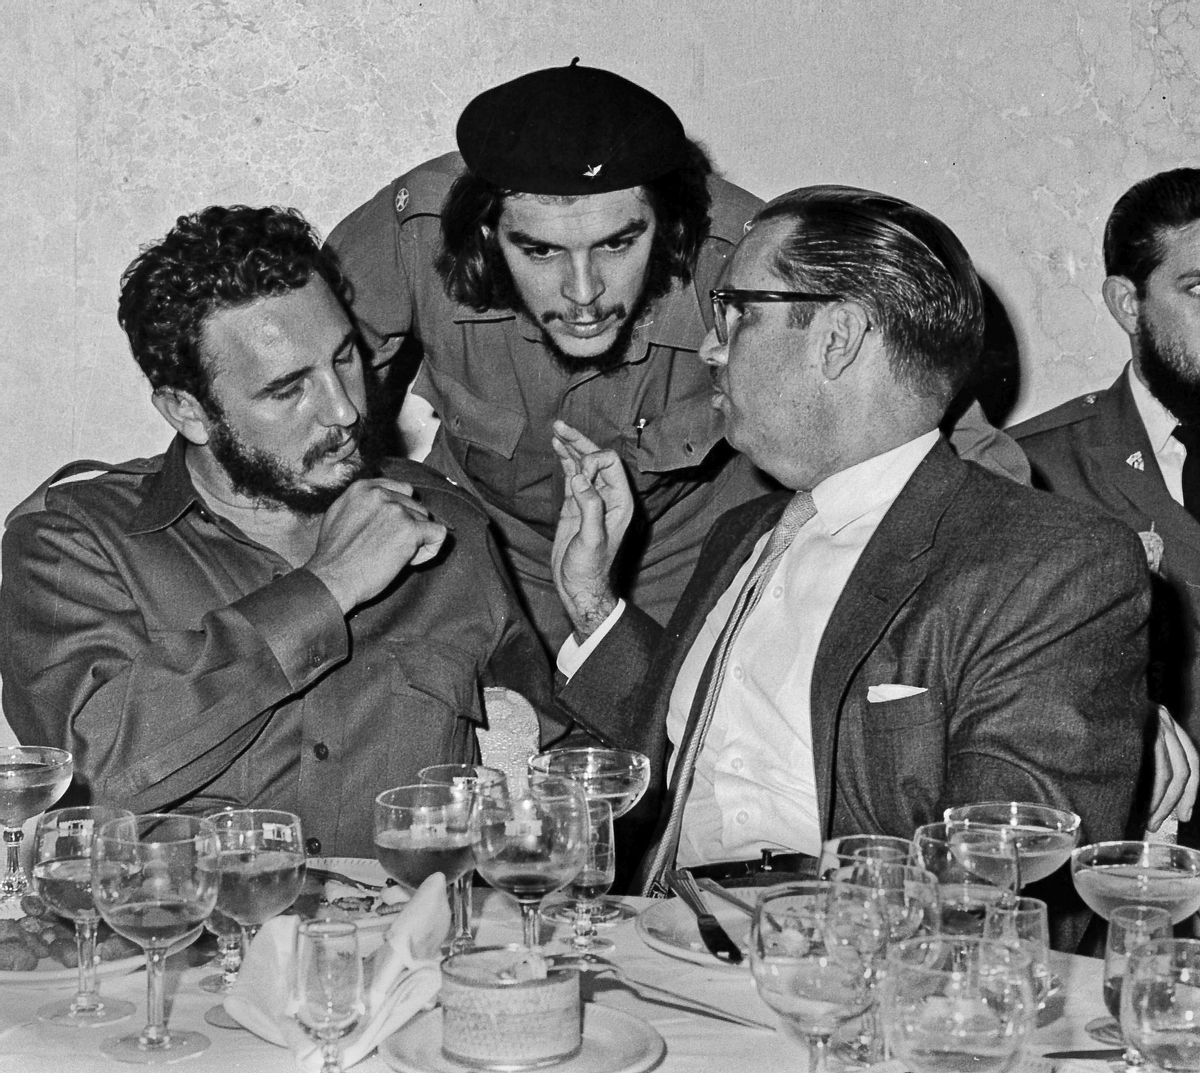 FILE - In this 1960 file photo, Cuba's revolutionary hero Ernesto "Che" Guevara, center, Cuba's leader Fidel Castro, left, and Cuba's President Osvaldo Dorticos, right, attend a reception in an unknown location in Cuba. Castro has died at age 90. President Raul Castro said on state television that his older brother died at 10:29 p.m. Friday, Nov. 25, 2016. (AP Photo/Prensa Latina via AP Images, File) (AP)